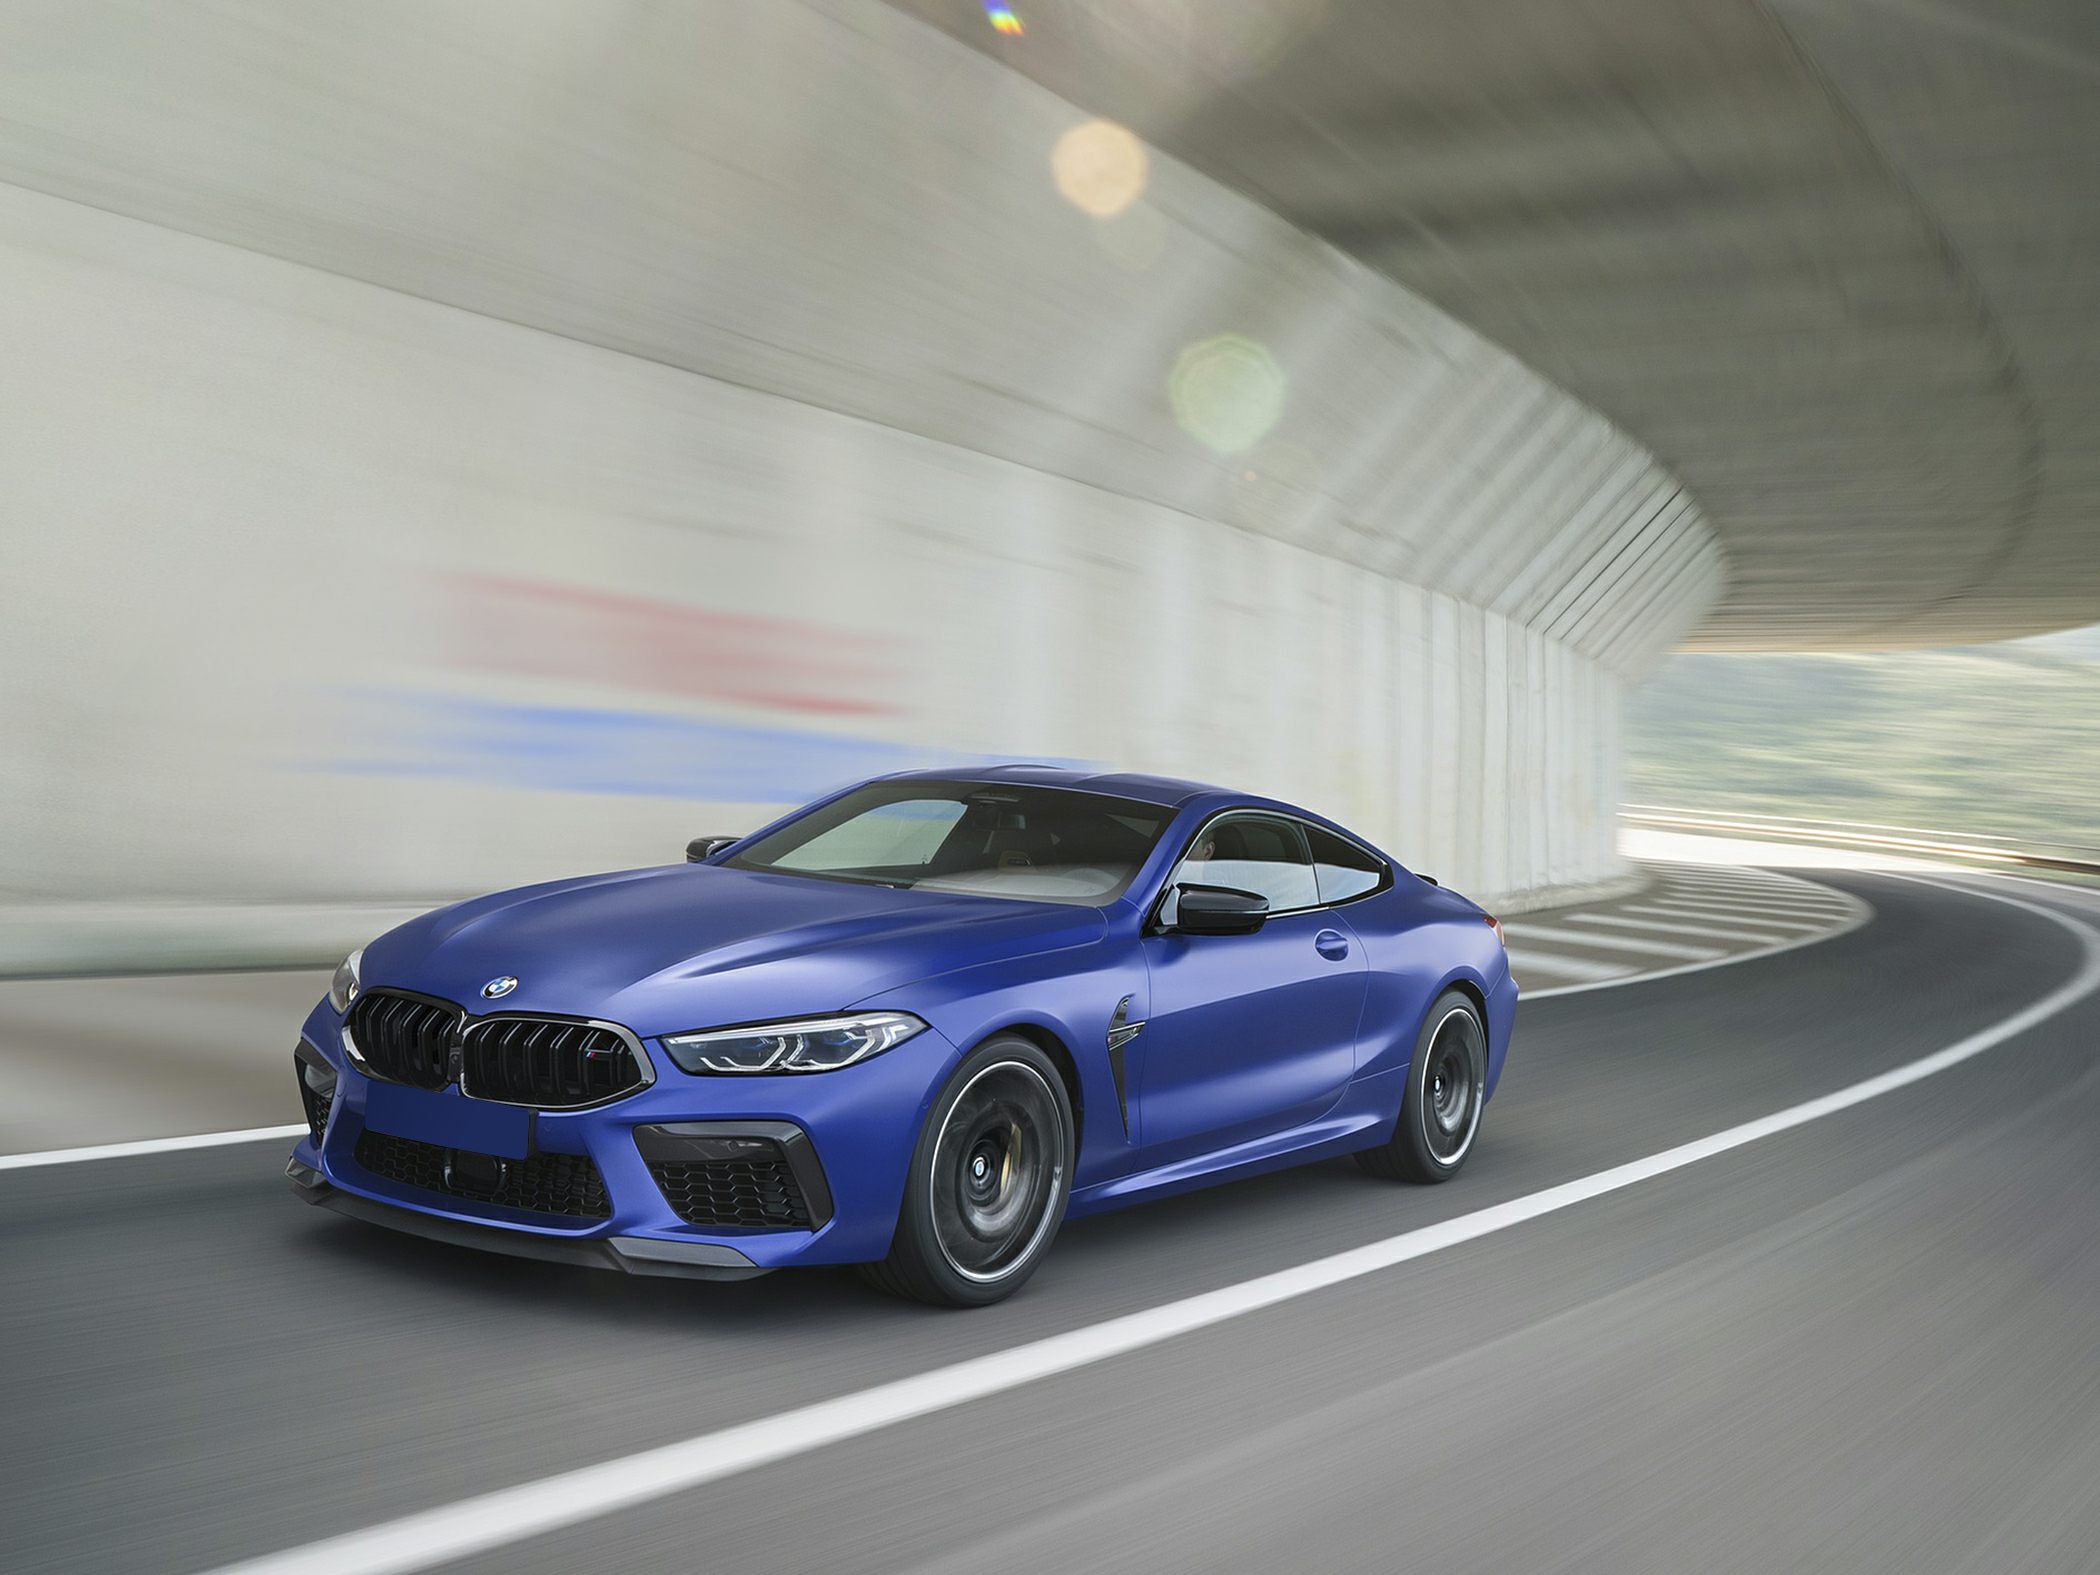 Bmw M8 Coupe And M8 Convertible Back For 22 Model Year With Giant Price Cuts